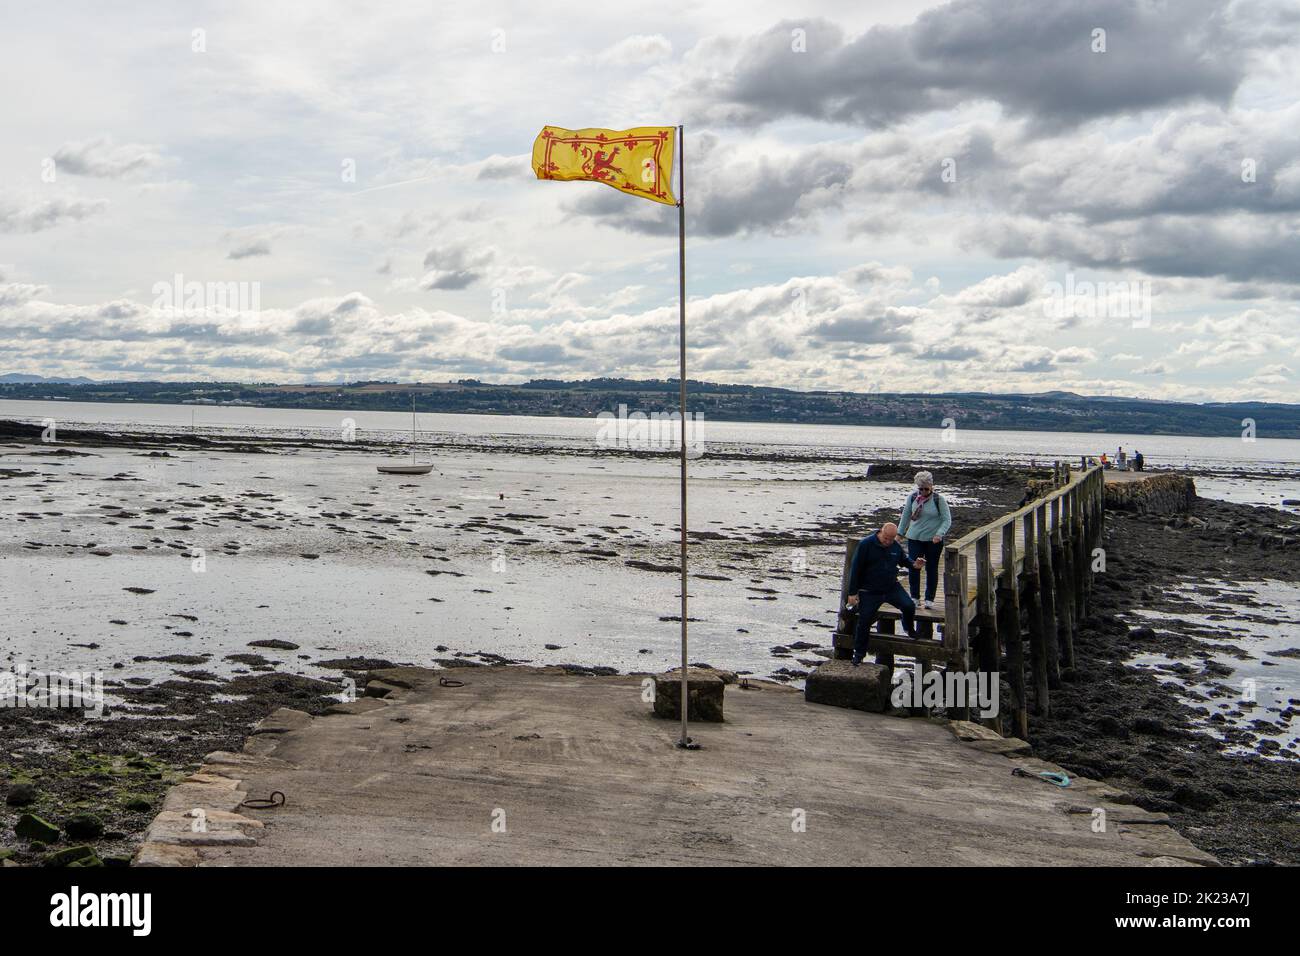 The Royal Banner of Scotland flag flying at a pier in the Firth of Forth in Culross, Scotland, UK, with two people descending from the pier. Stock Photo